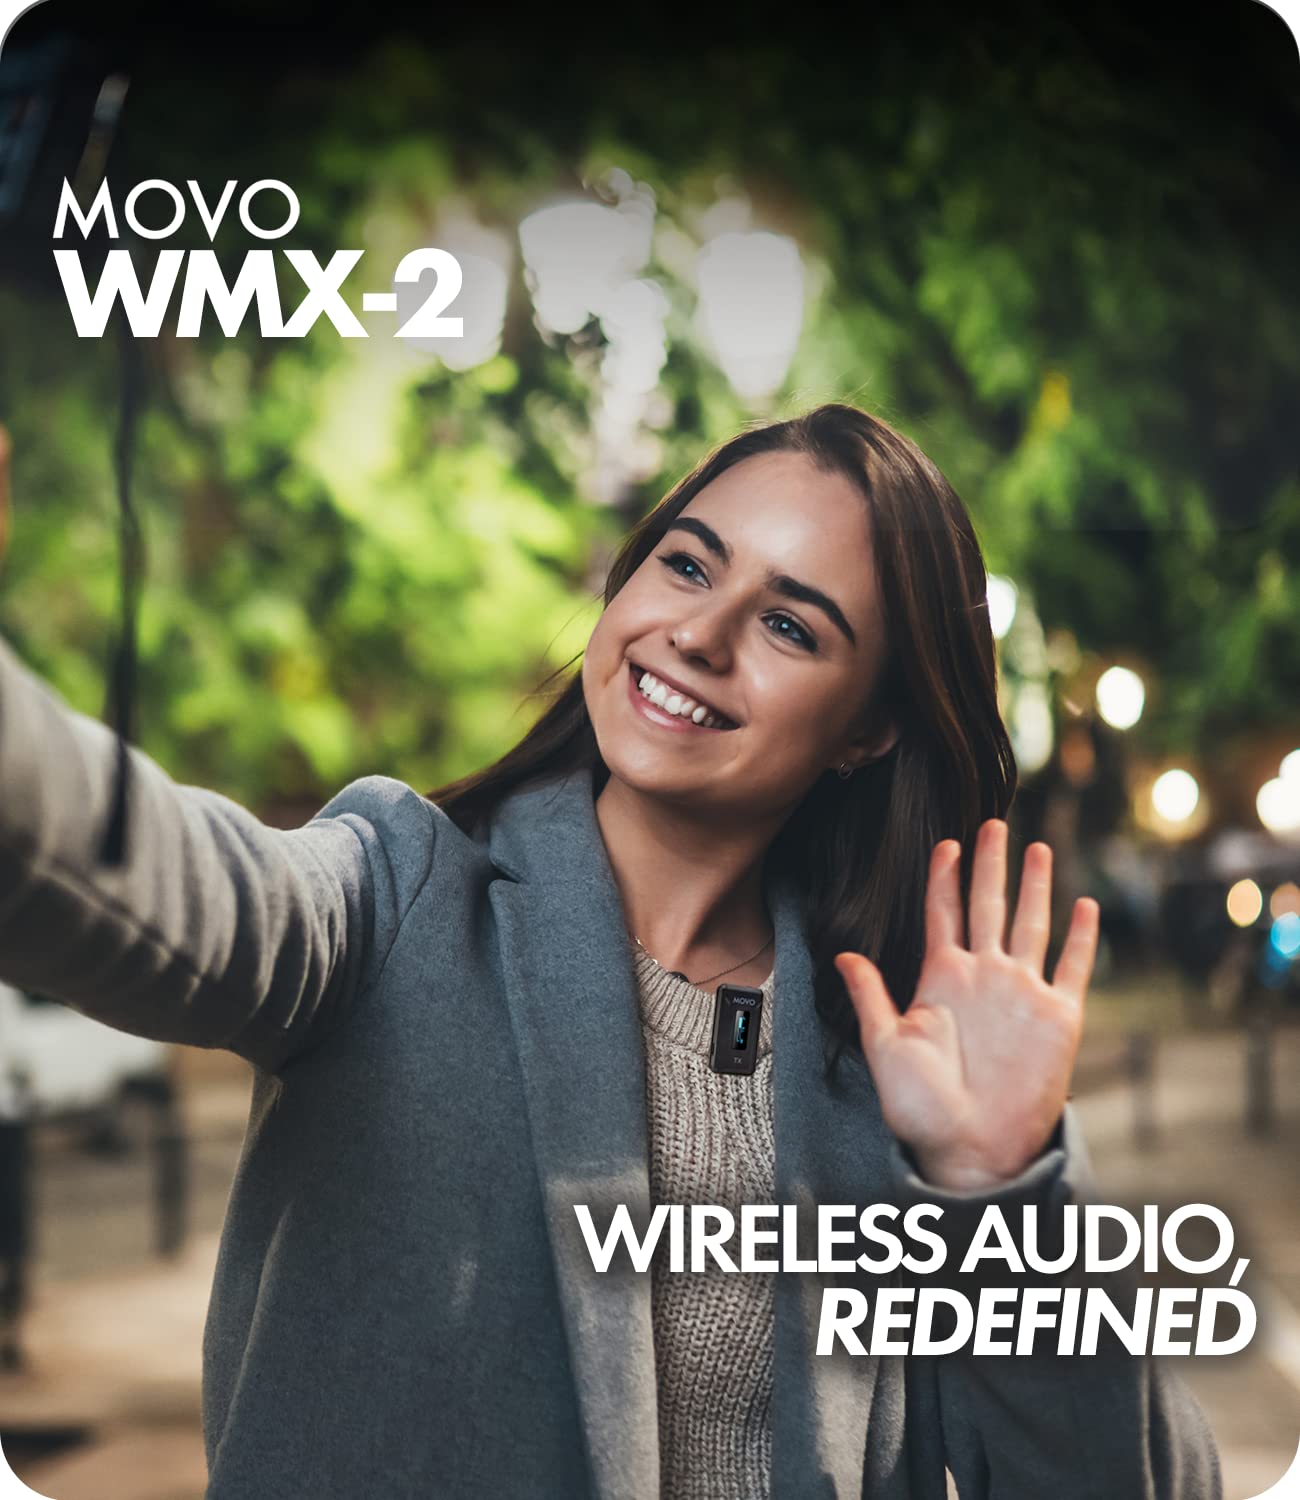 Movo WMX-2 Wireless Camera Microphone with Charging Case - Wireless Lapel Mic - 7HR Battery, 328' Range, Adjustable Gain, & LED Display